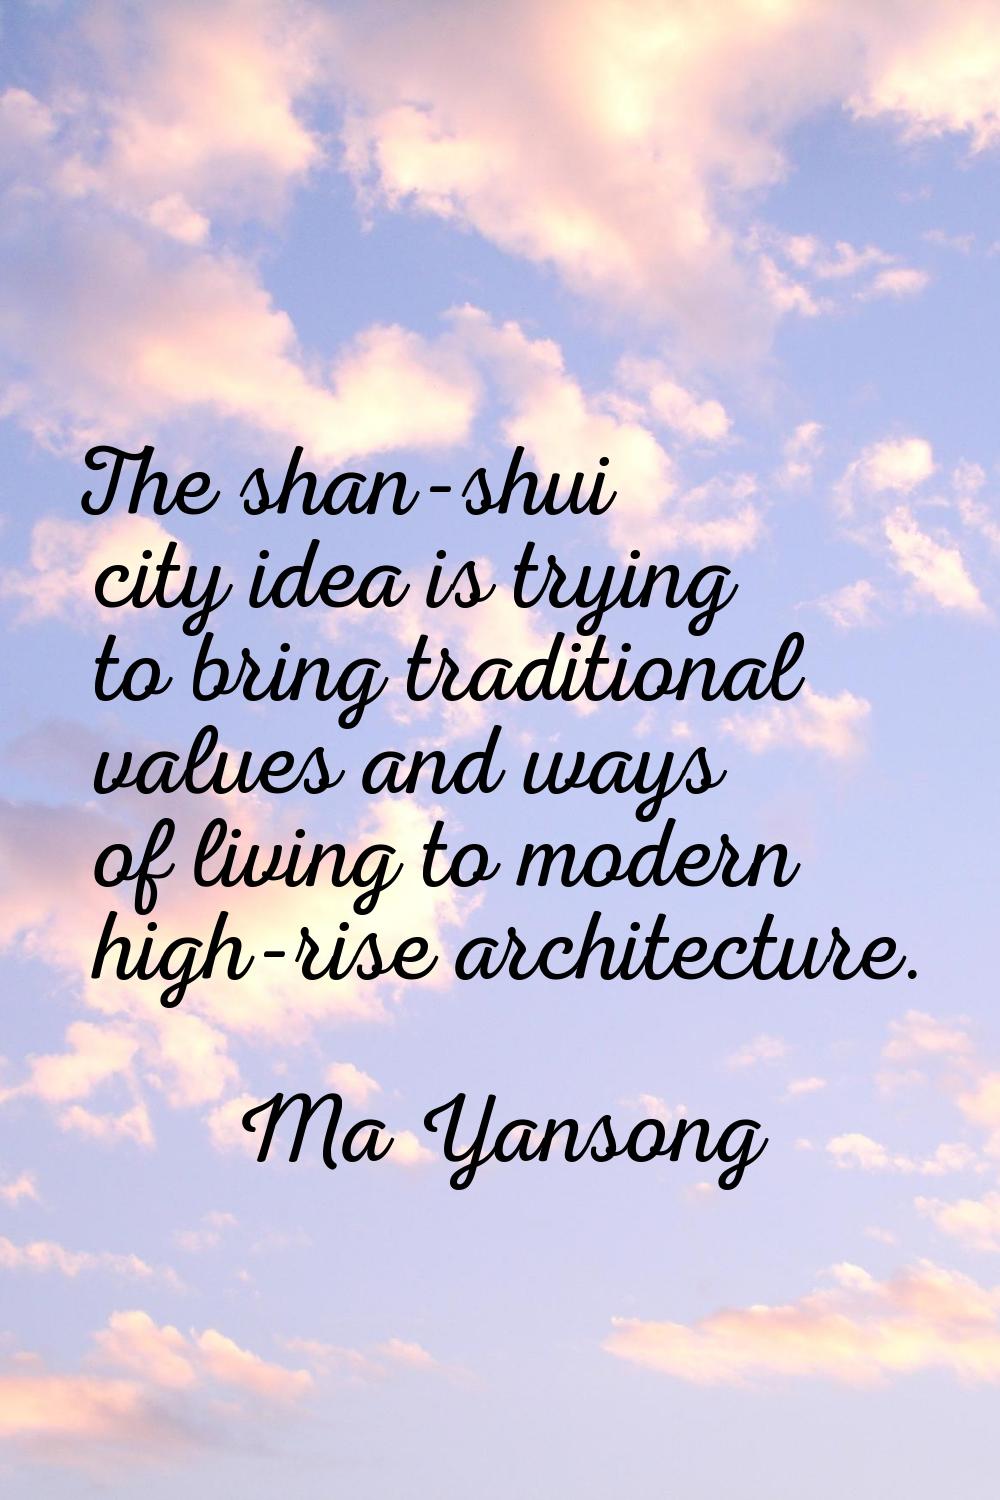 The shan-shui city idea is trying to bring traditional values and ways of living to modern high-ris